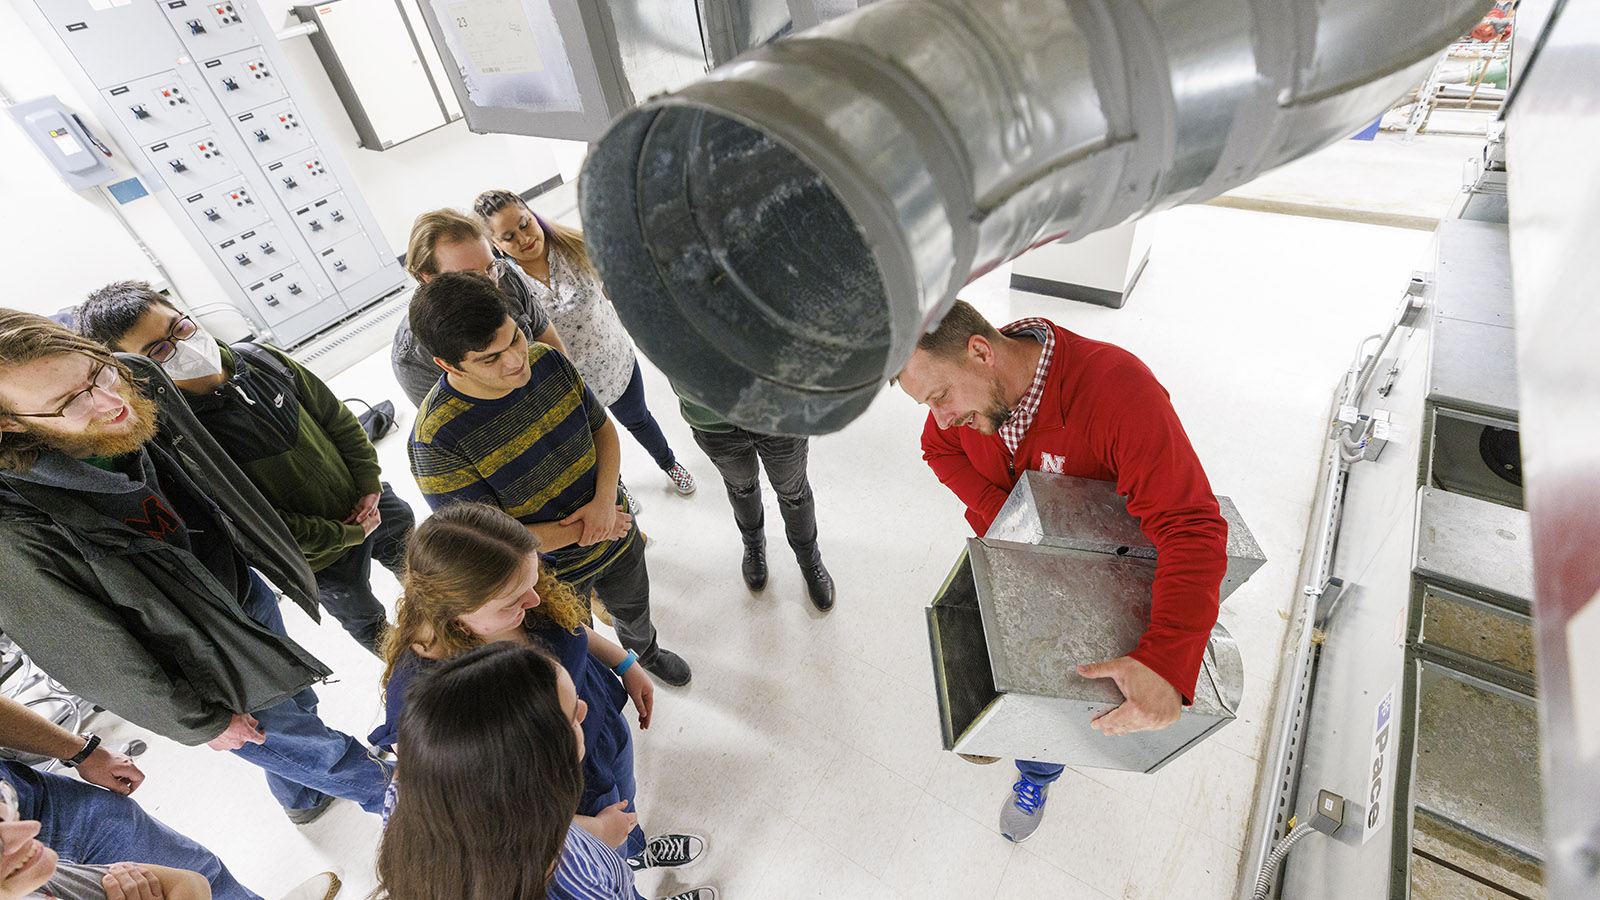 Students and faculty member looking at an HVAC system